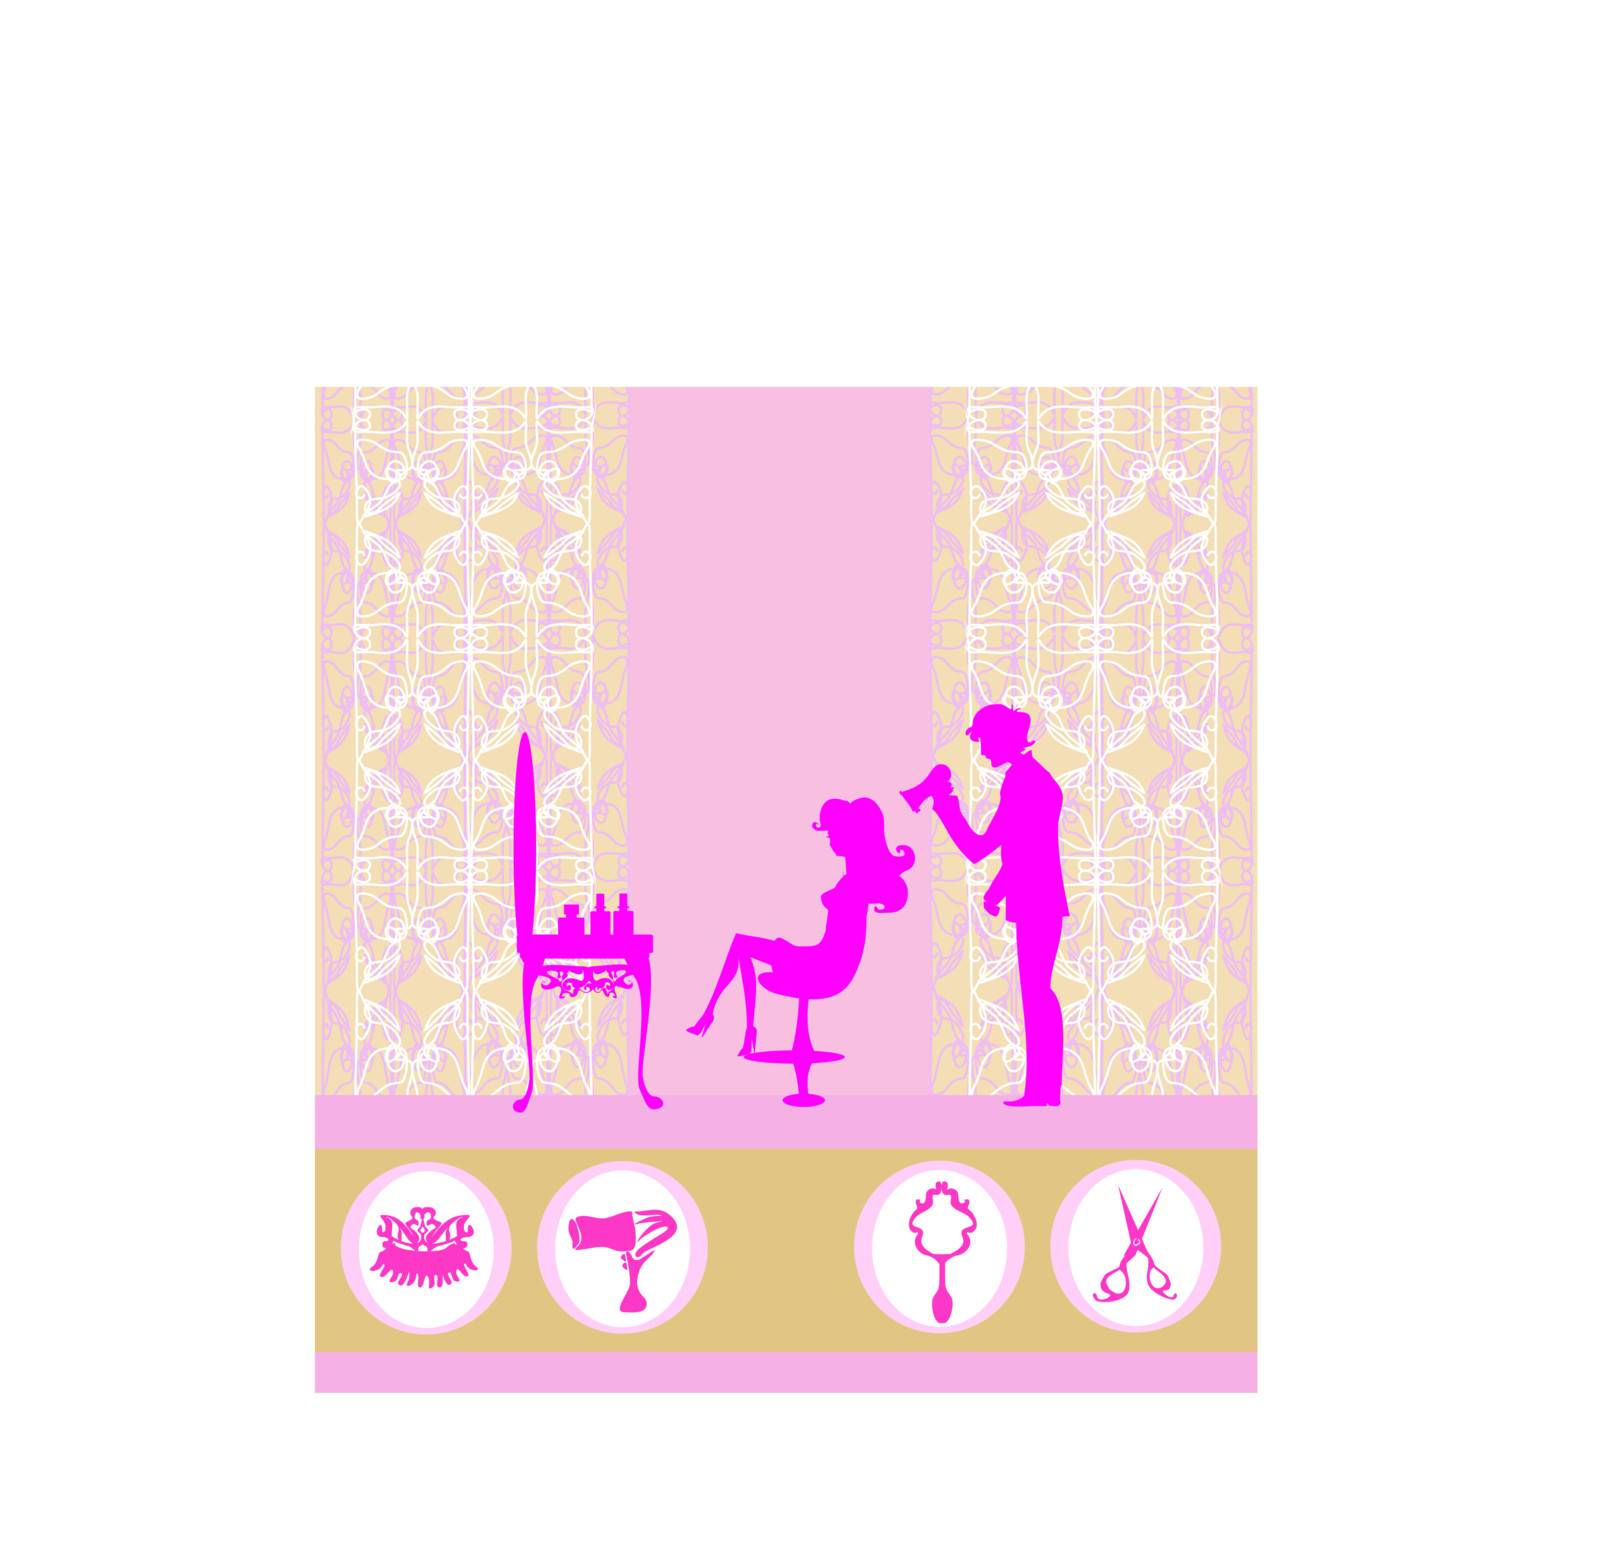 beautiful woman silhouette in barber shop by JackyBrown